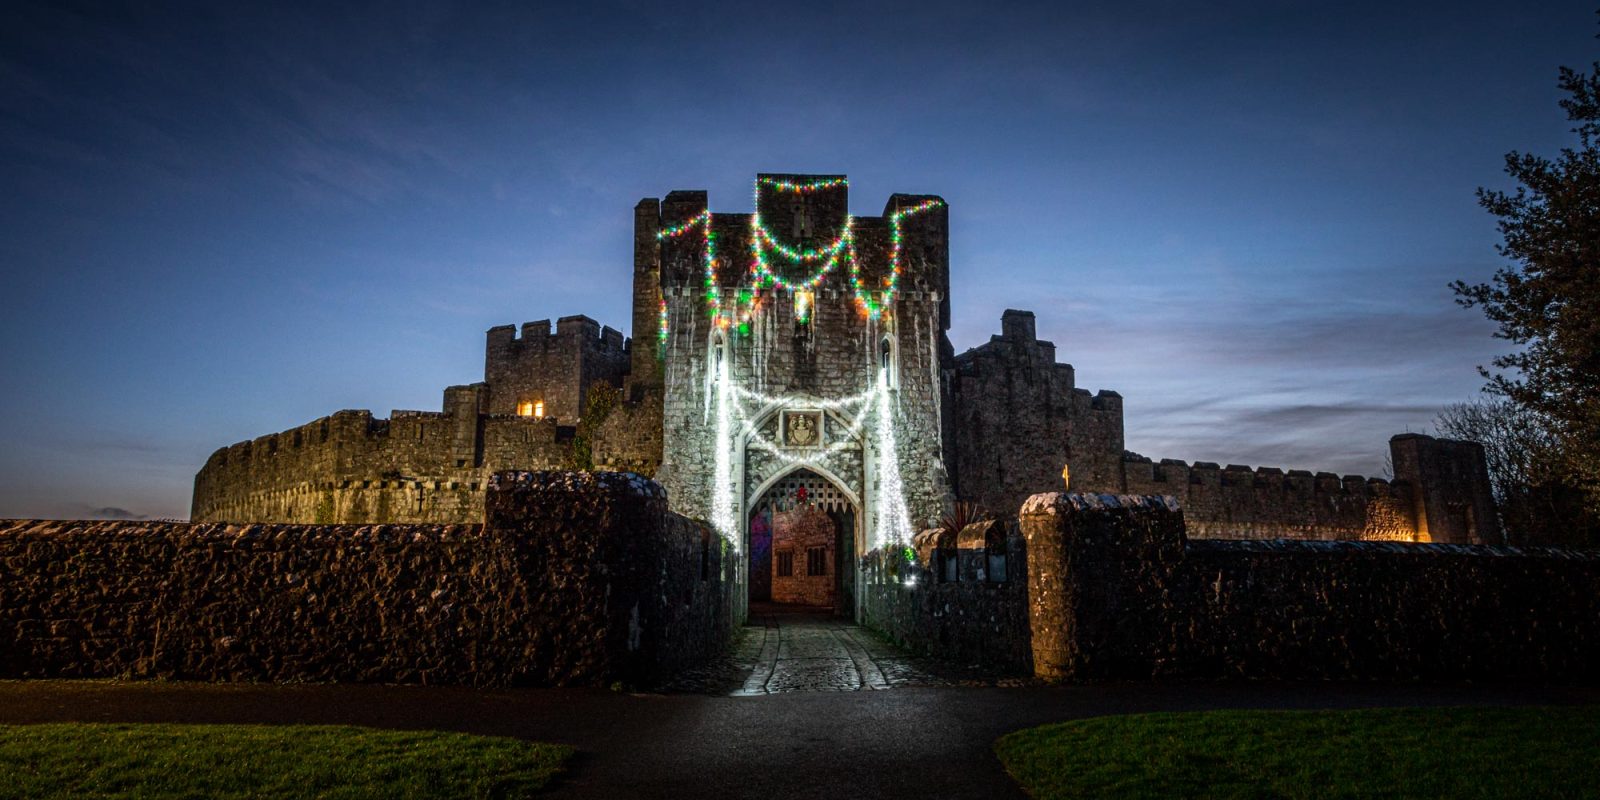 St Donat's Castle with Christmas lights draped at nighttime